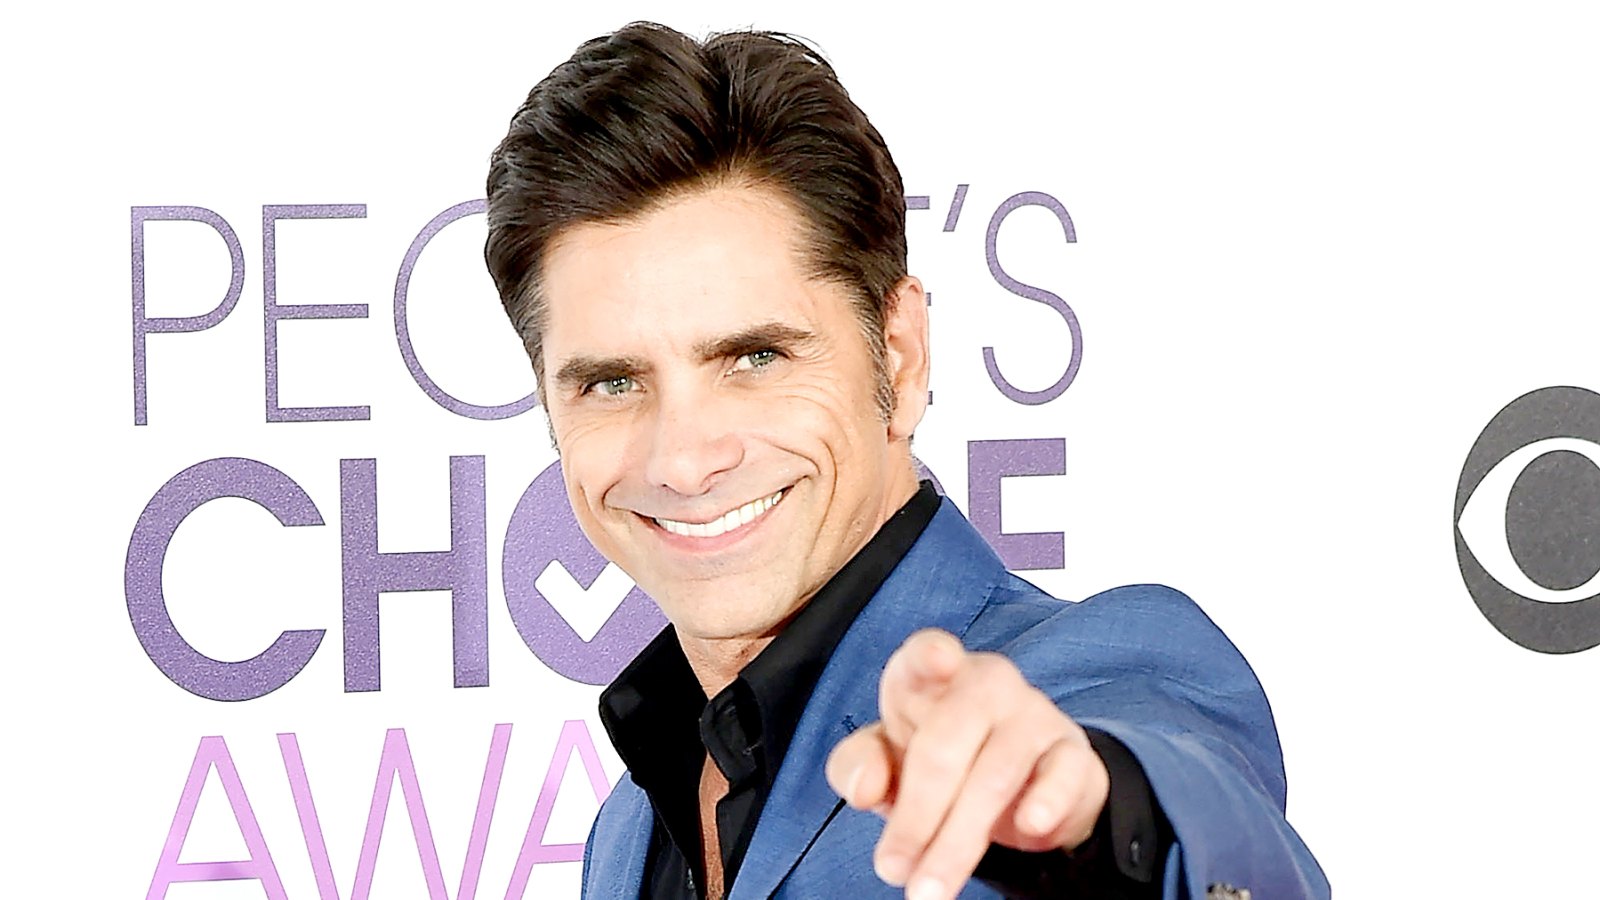 John Stamos attends the People's Choice Awards 2017 - Arrivals at Microsoft Theater on January 18, 2017 in Los Angeles, California.